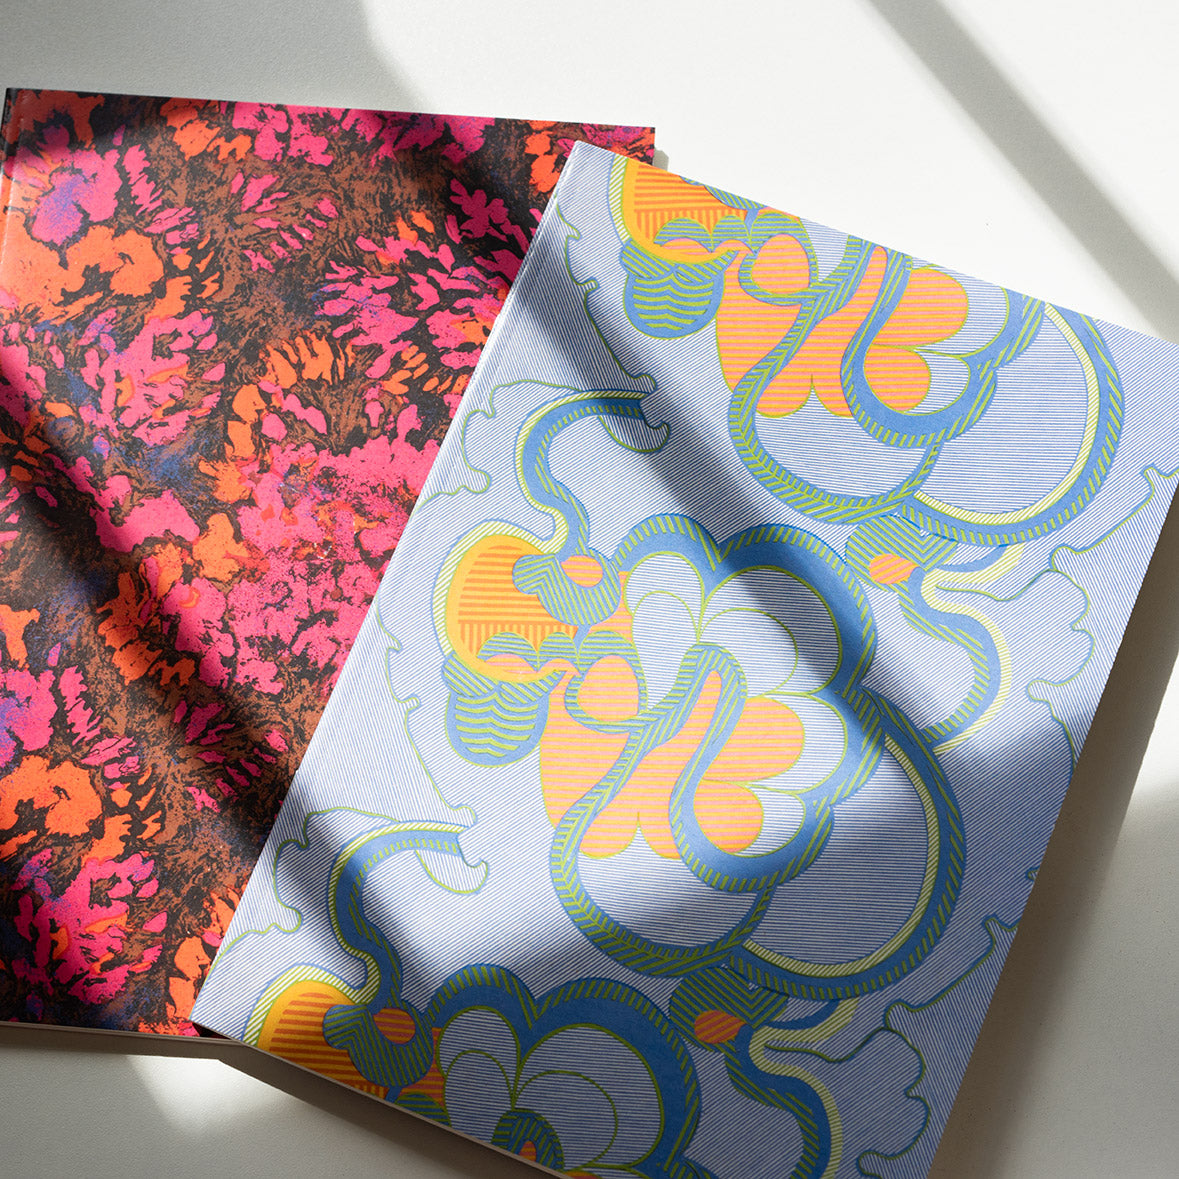 Two notebooks featuring Shirley Craven designs laid out flat on a table.